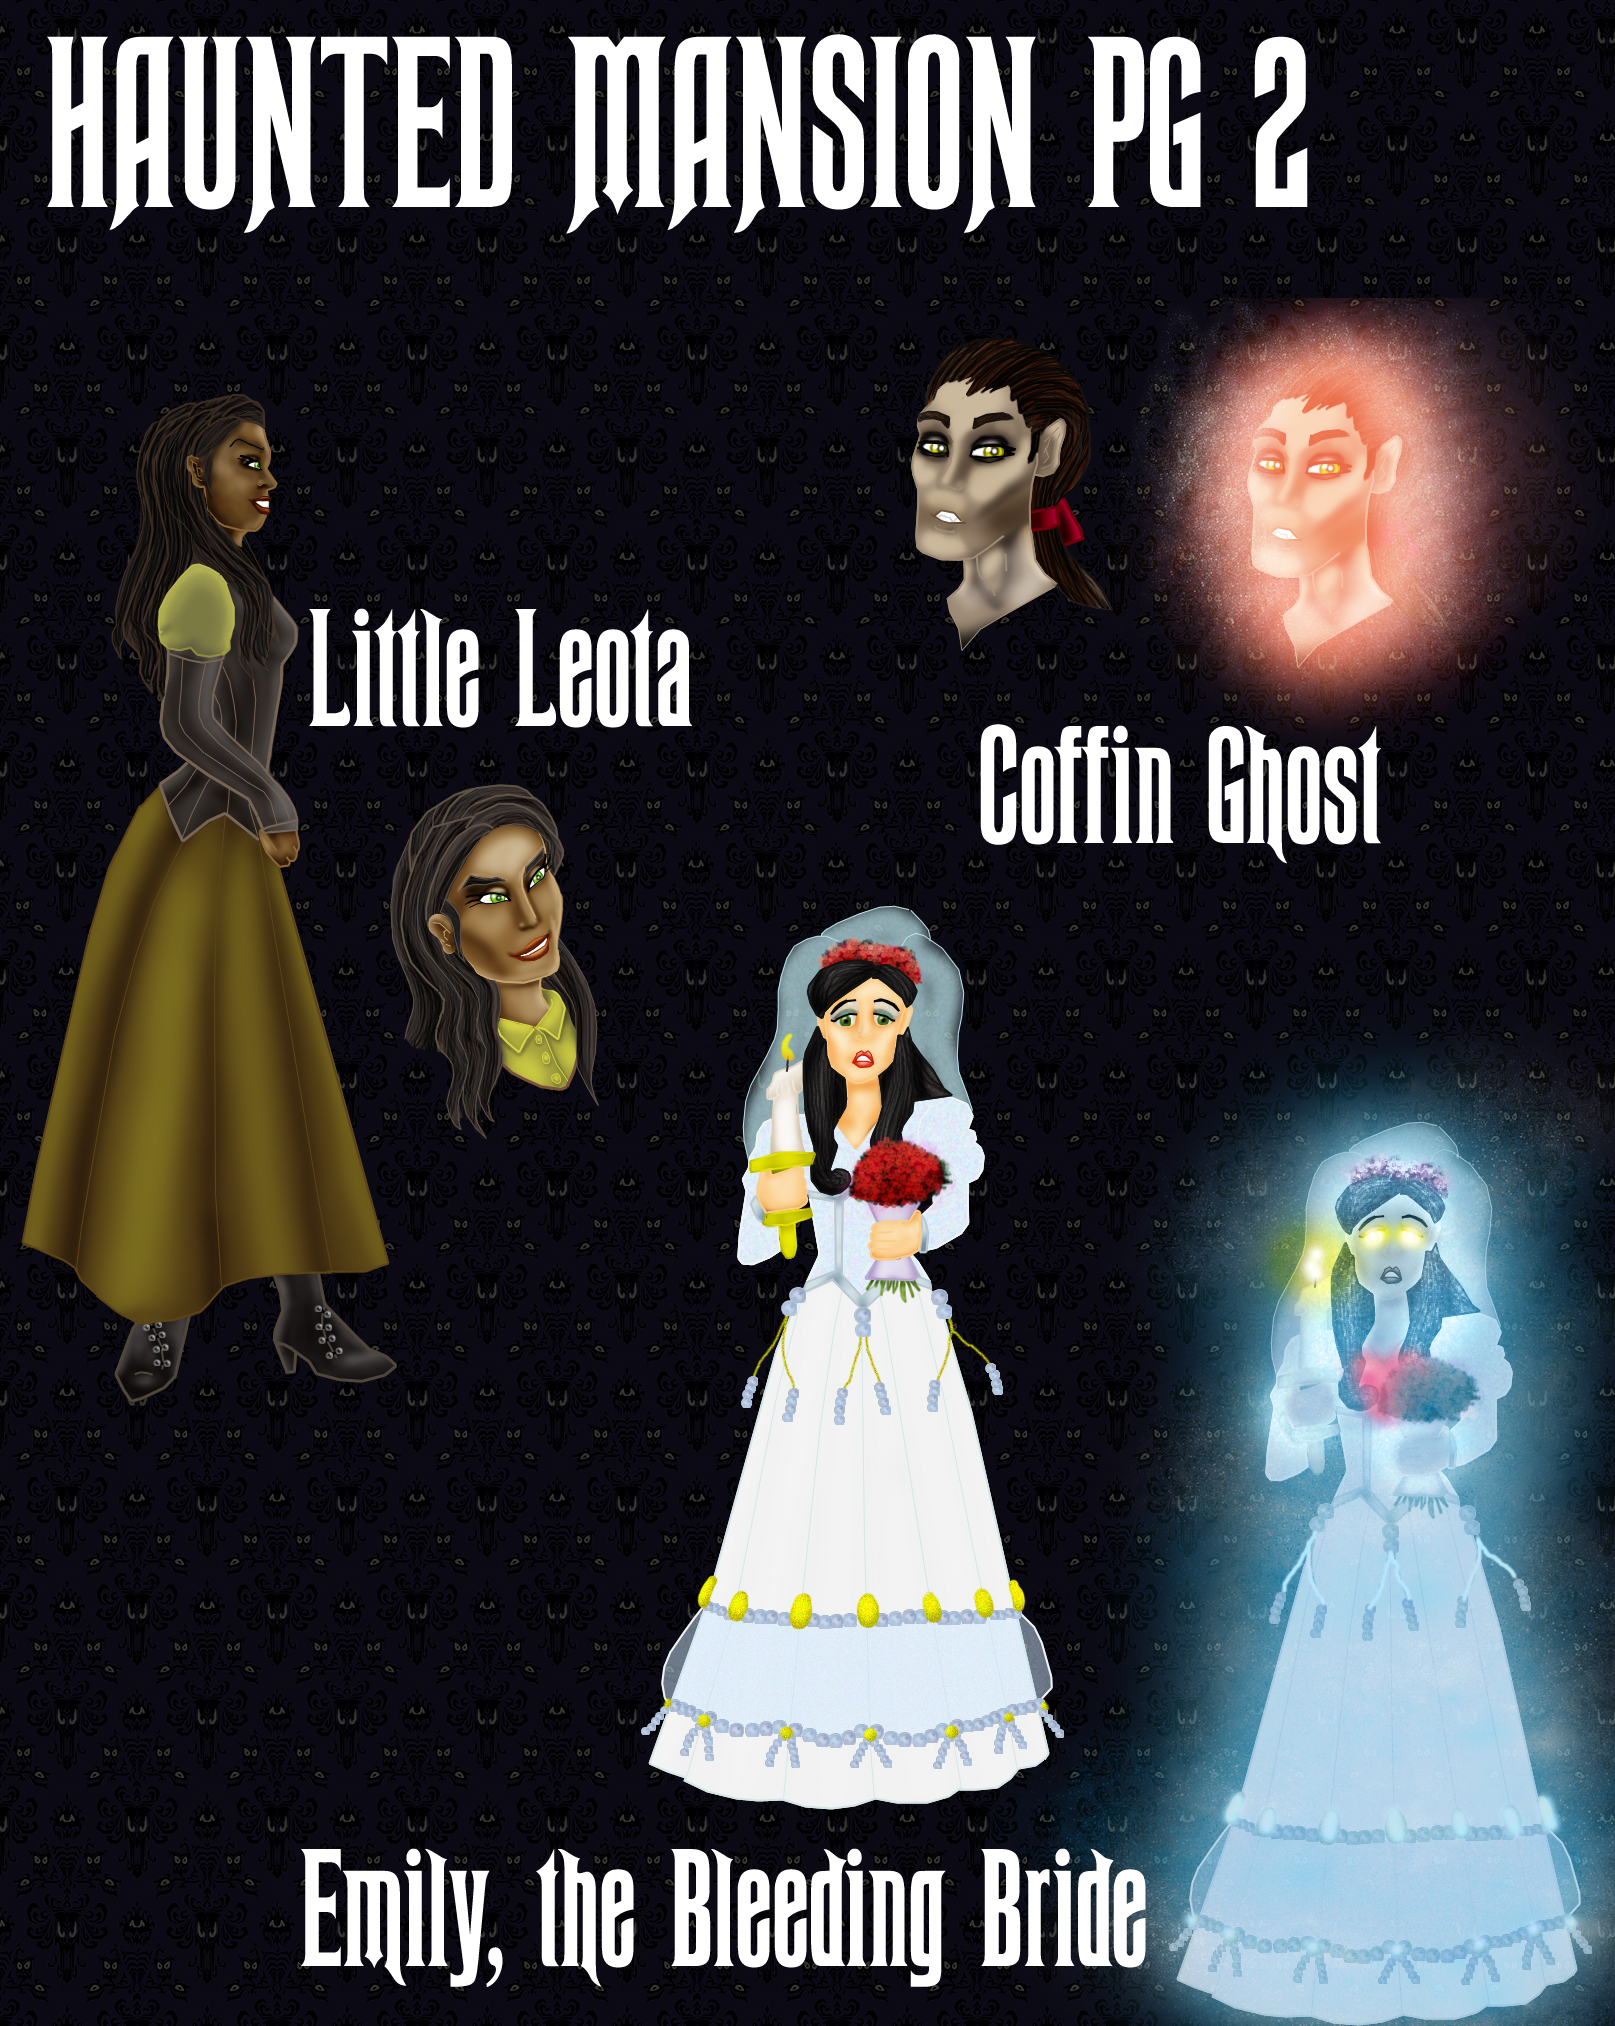 Haunted_Mansion_Page_2_by_Valor1387.jpg